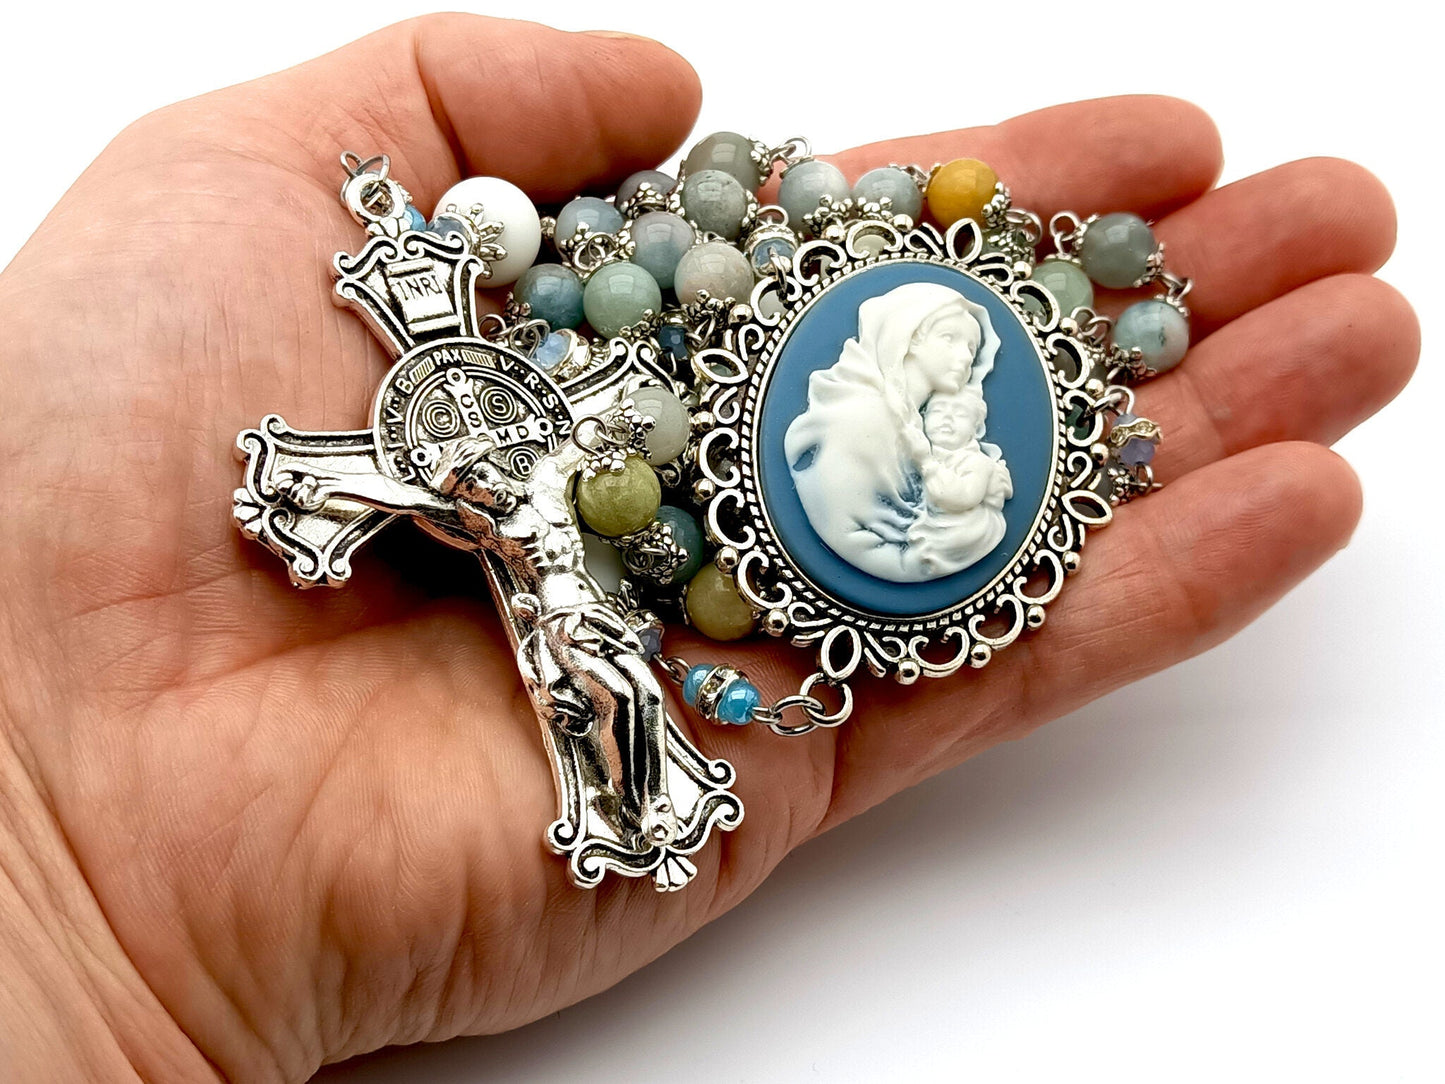 Mary and Jesus cameo unique rosary beads with aquamarine and alabaster gemstone rosary beads and Saint Benedict crucifix.